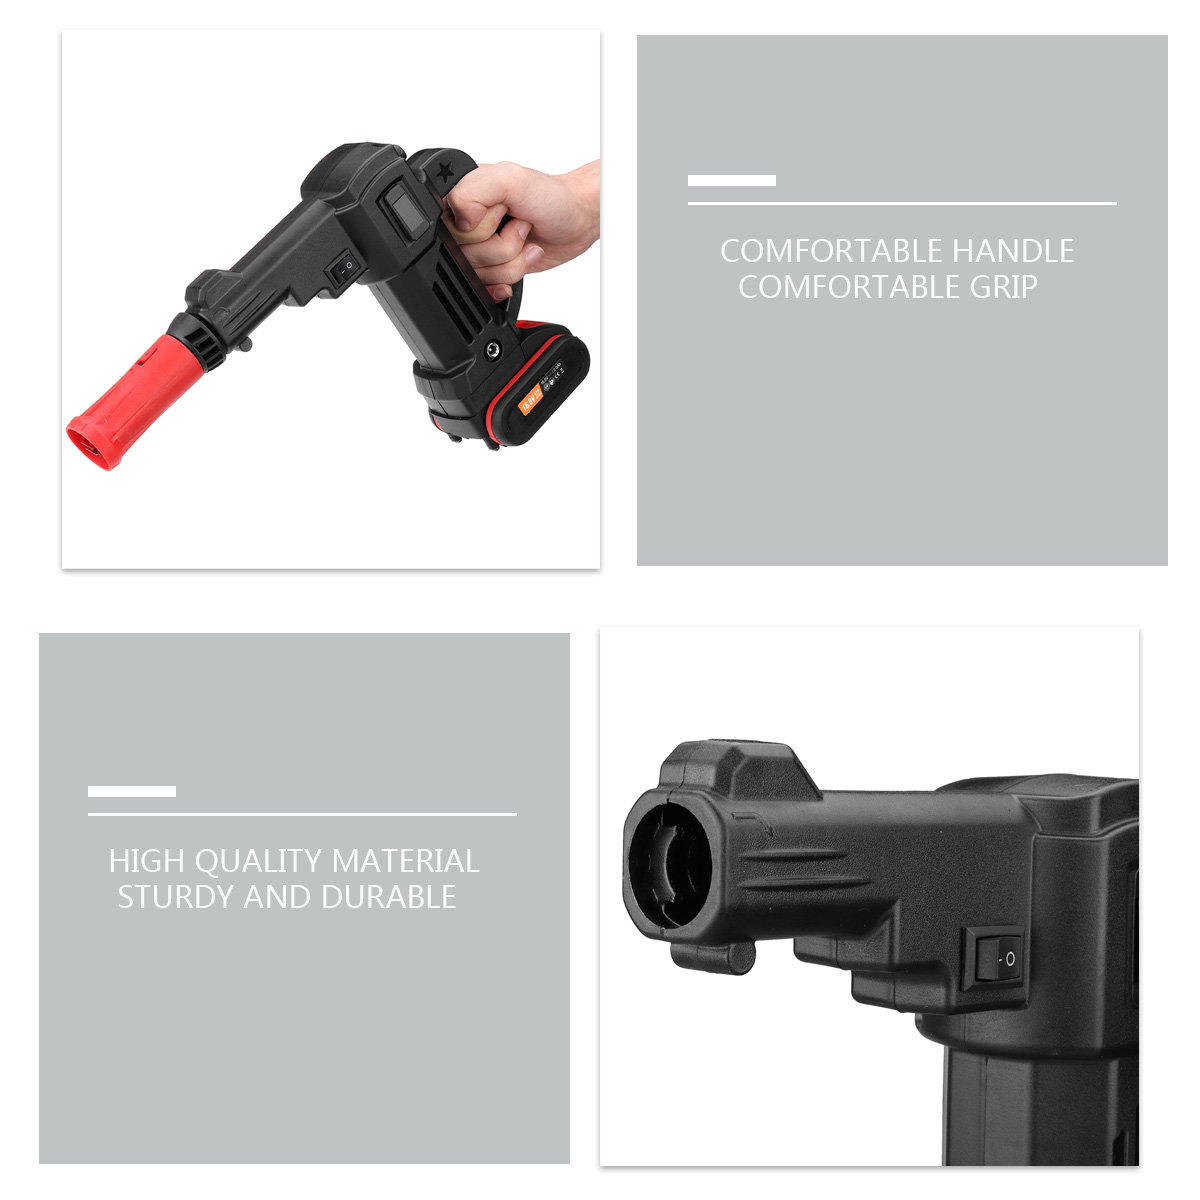 Rechargable-High-Pressure-Car-Washer-Cleaning-Wand-Nozzle-Spray-Guns-Flow-Controls-Tool-W-Filter-Wat-1837431-6